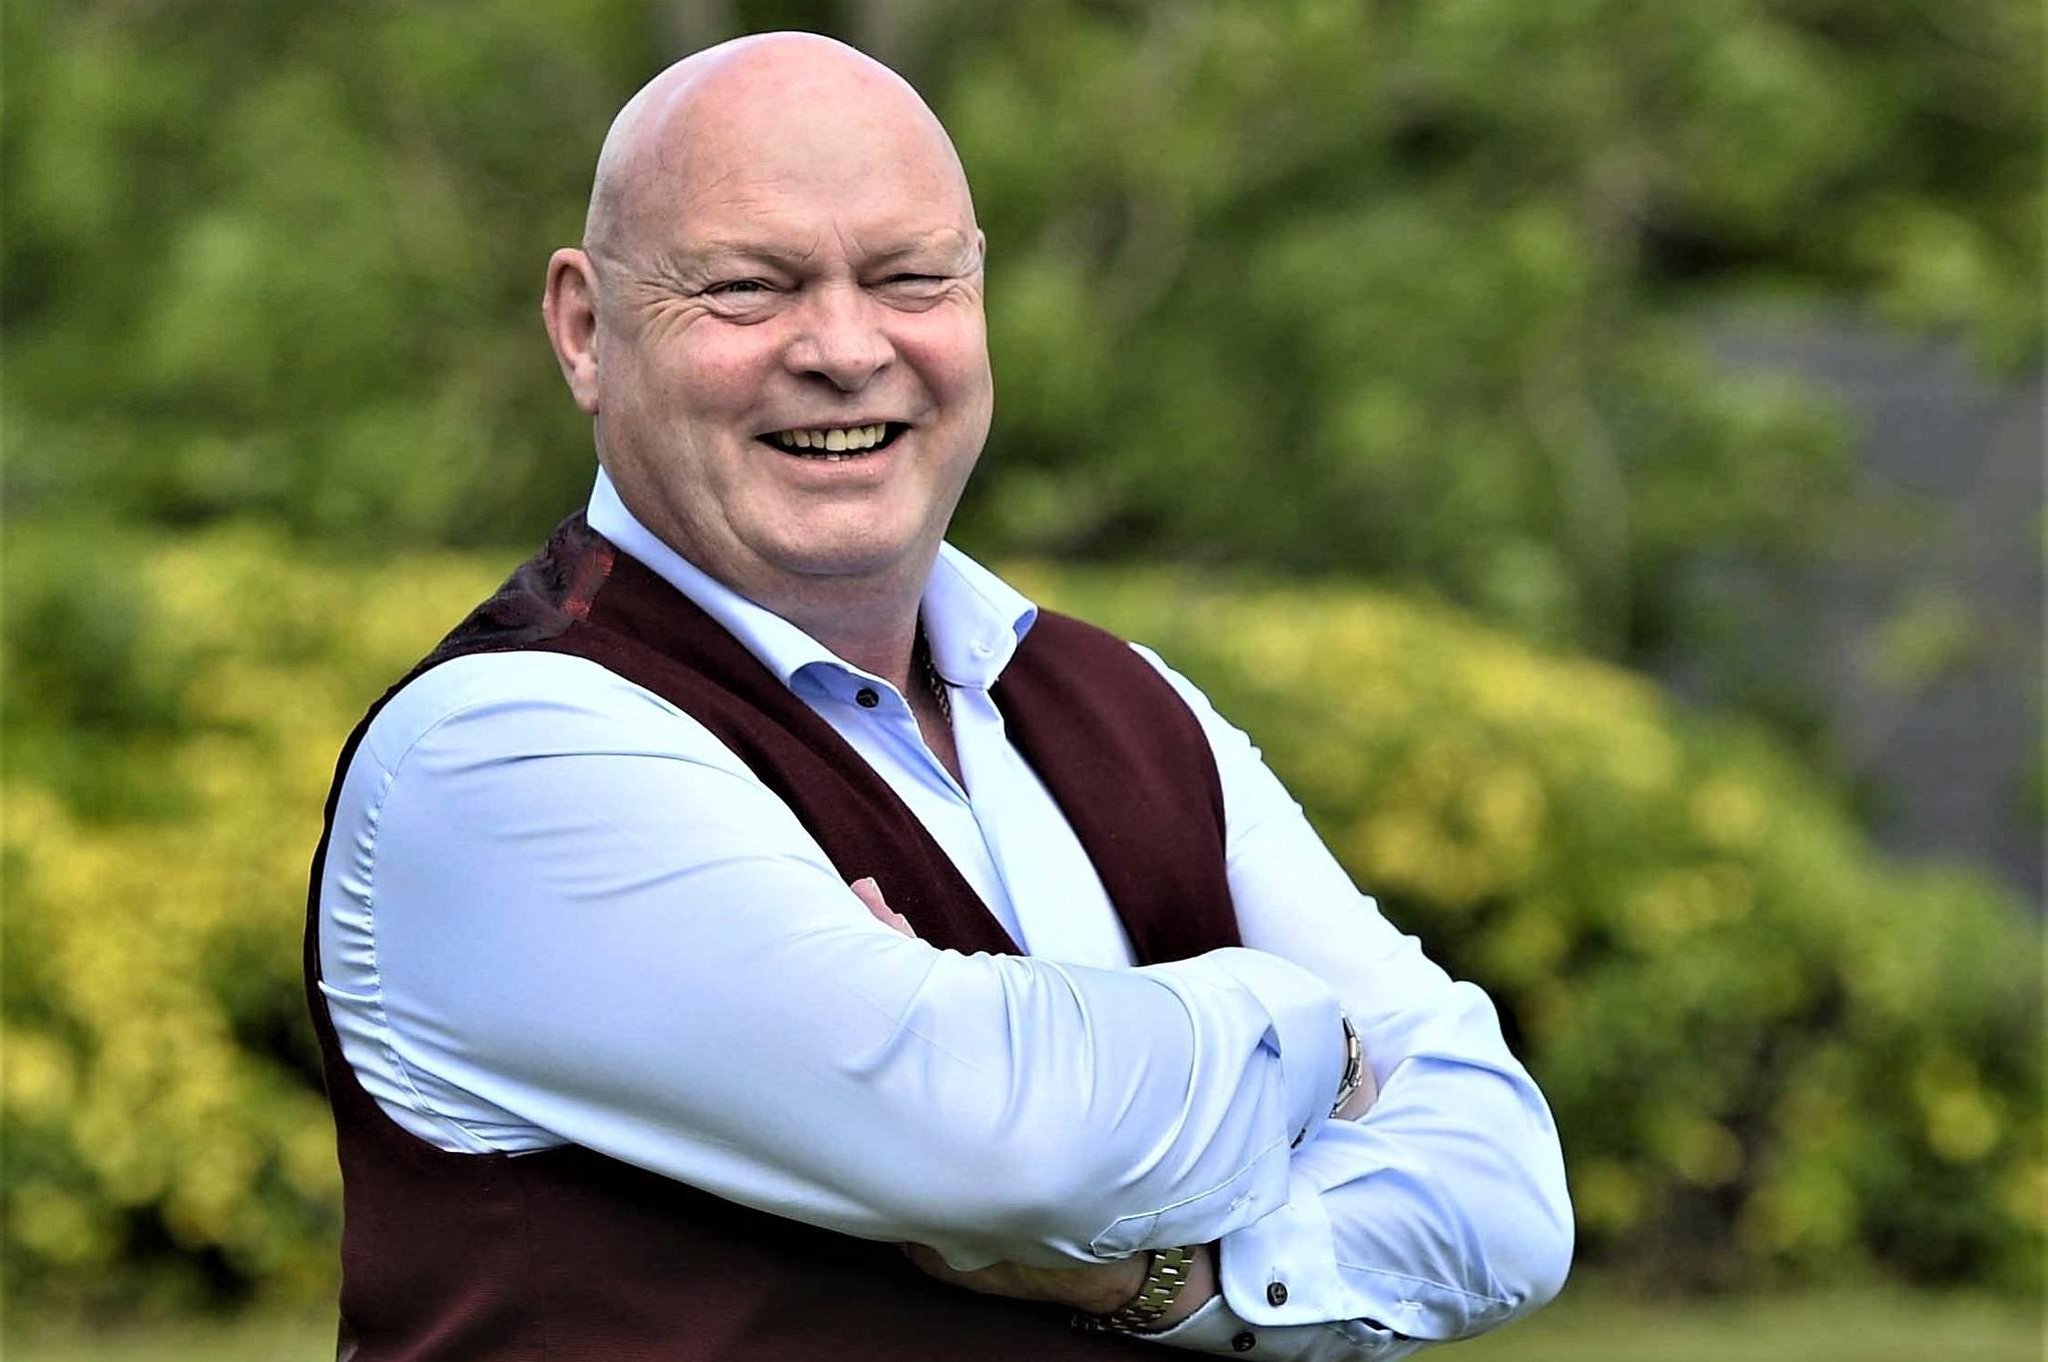 David Jeffrey: I'd prefer to avoid Sunday games – worship is my priority